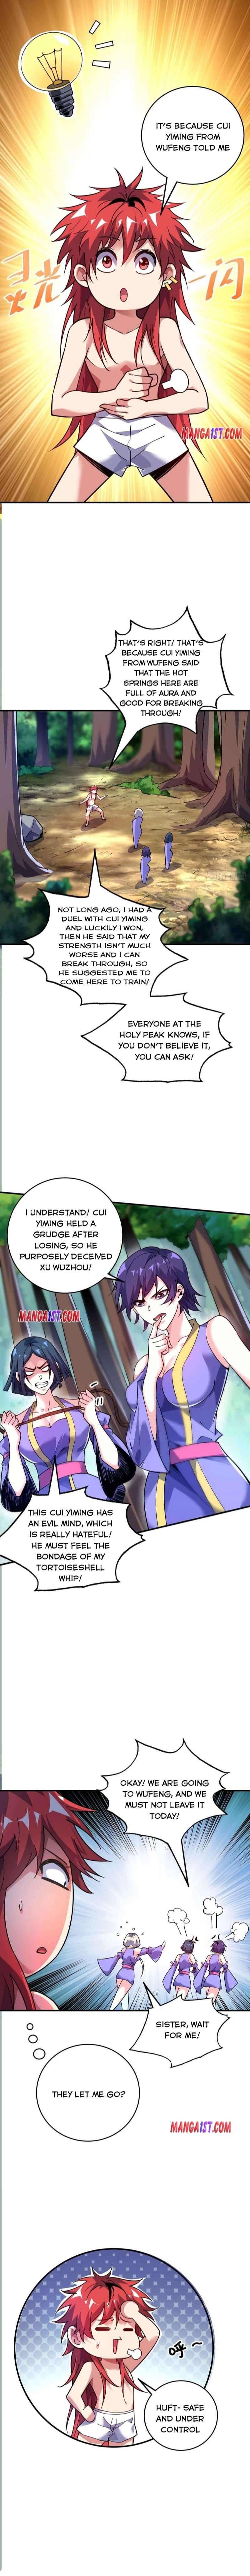 The First Son-In-Law Vanguard of All Time Chapter 125 page 2